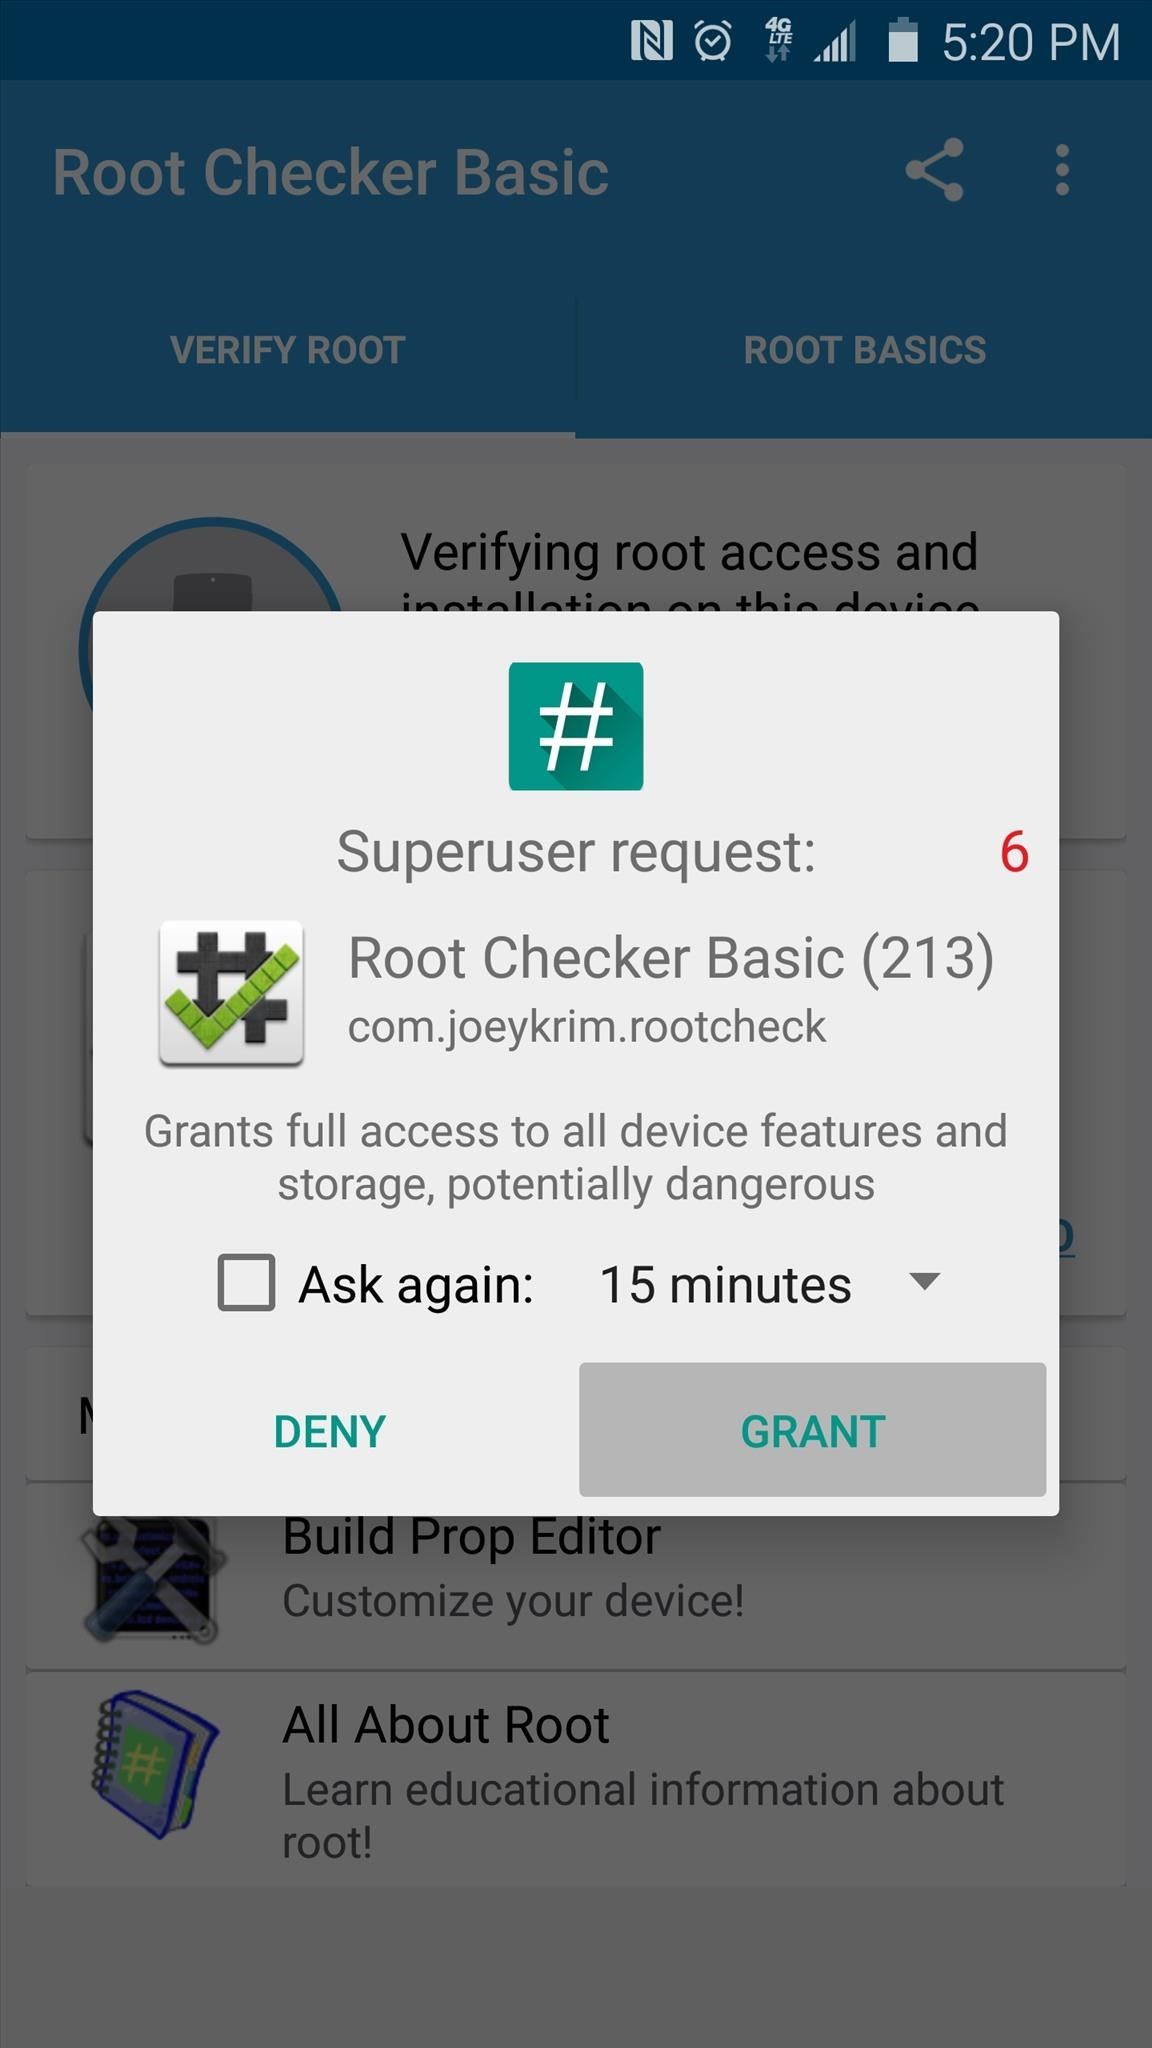 How to Root Almost Any Galaxy S6 or S6 Edge Without Tripping KNOX